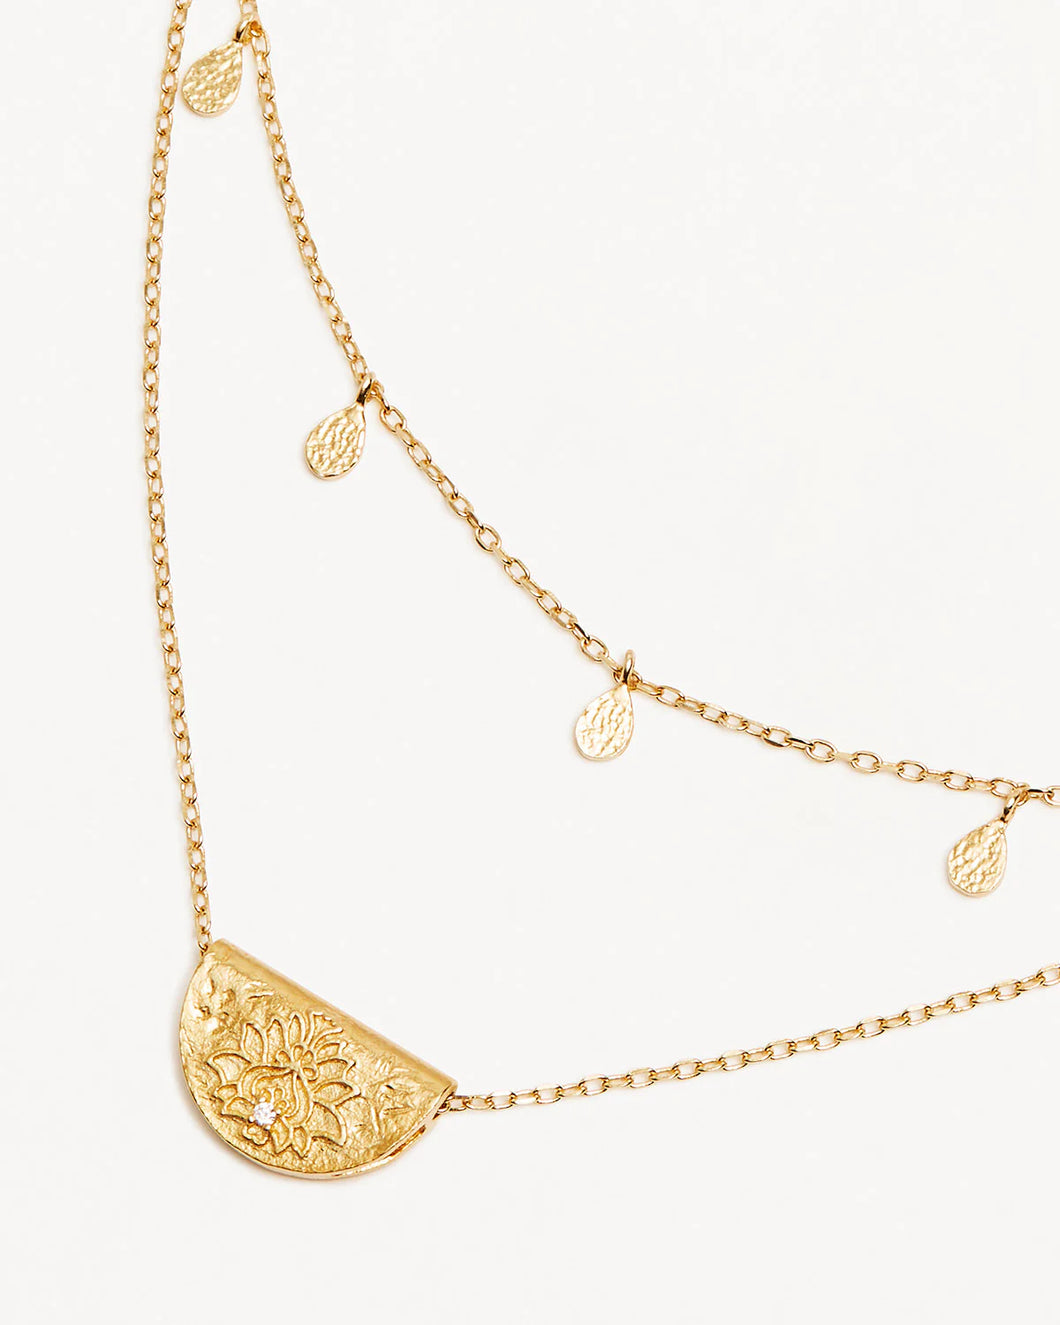 By Charlotte Blessed Lotus Gold Necklace